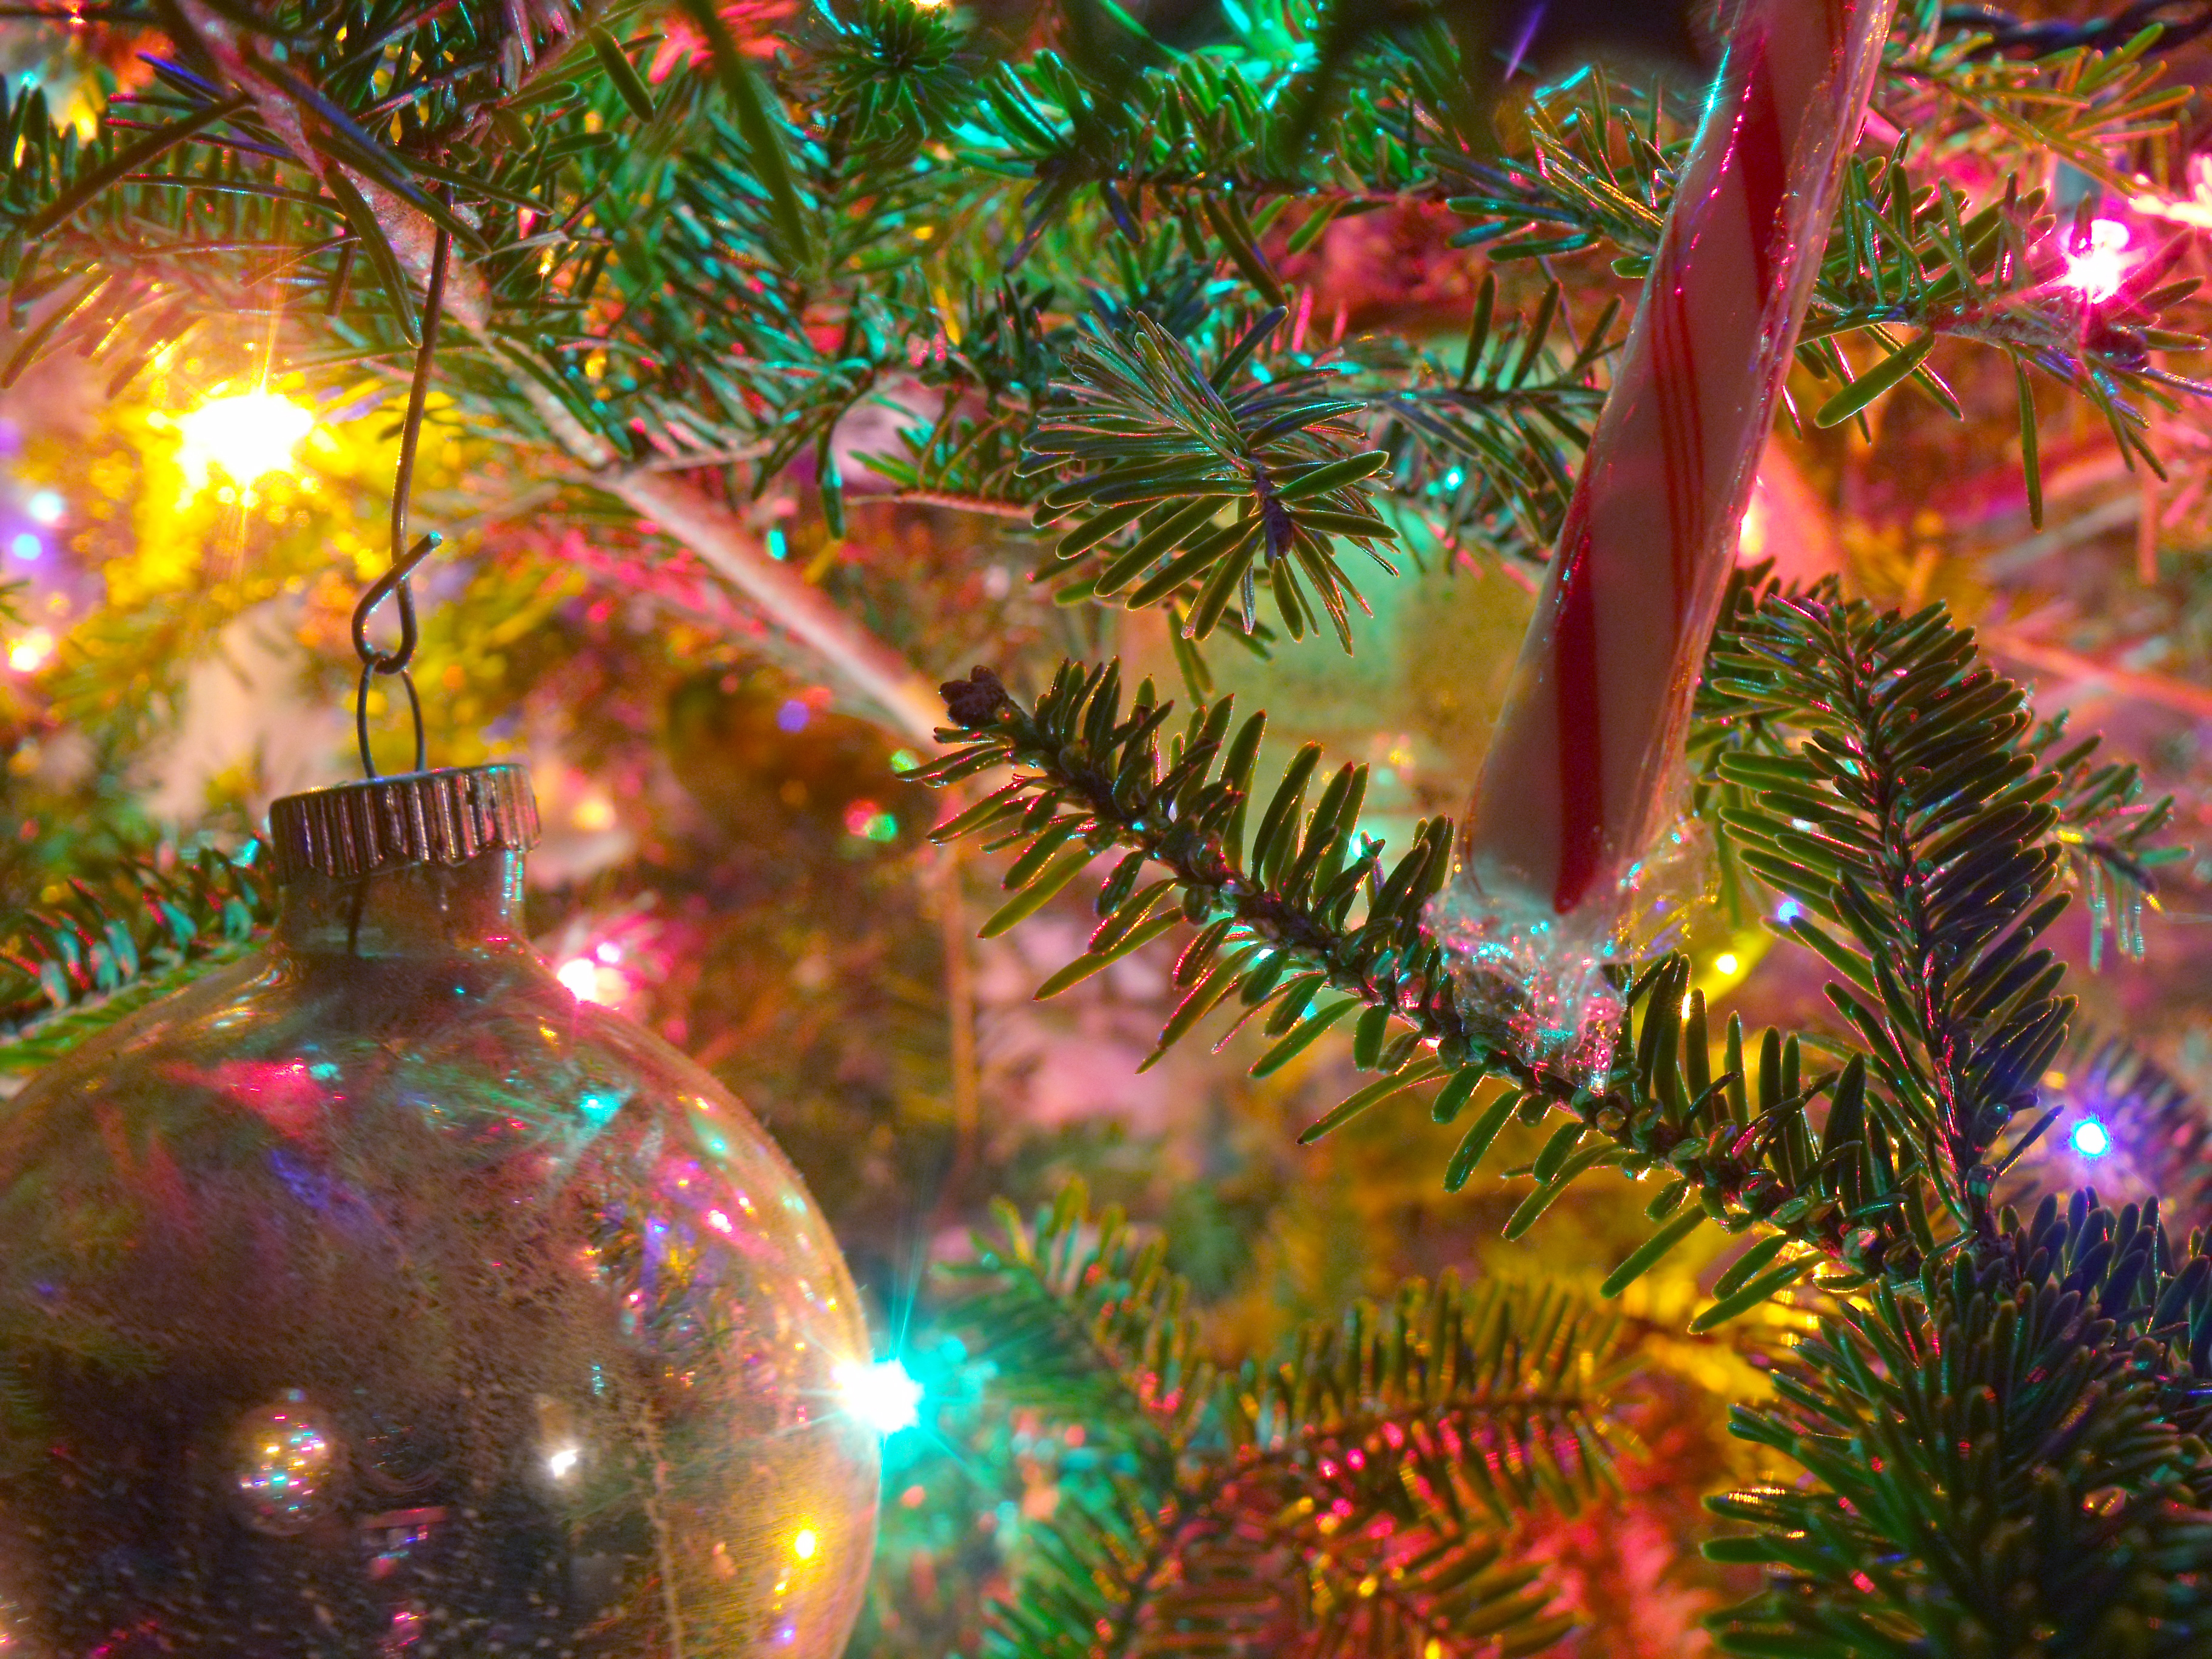 Detail Of The Craig Family Christmas Tree On Night December